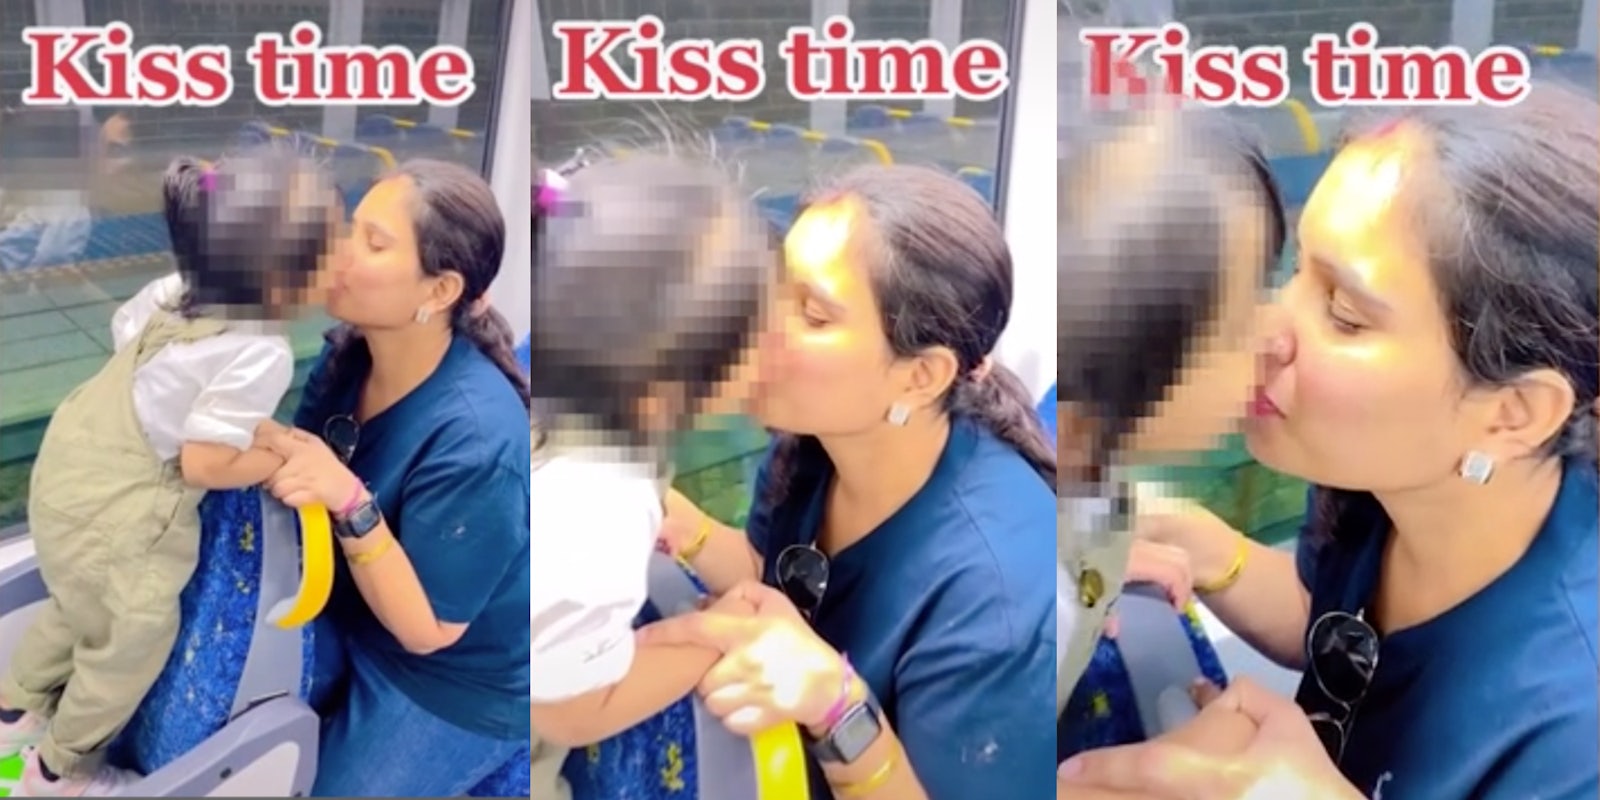 Mother and daughter kissing on train